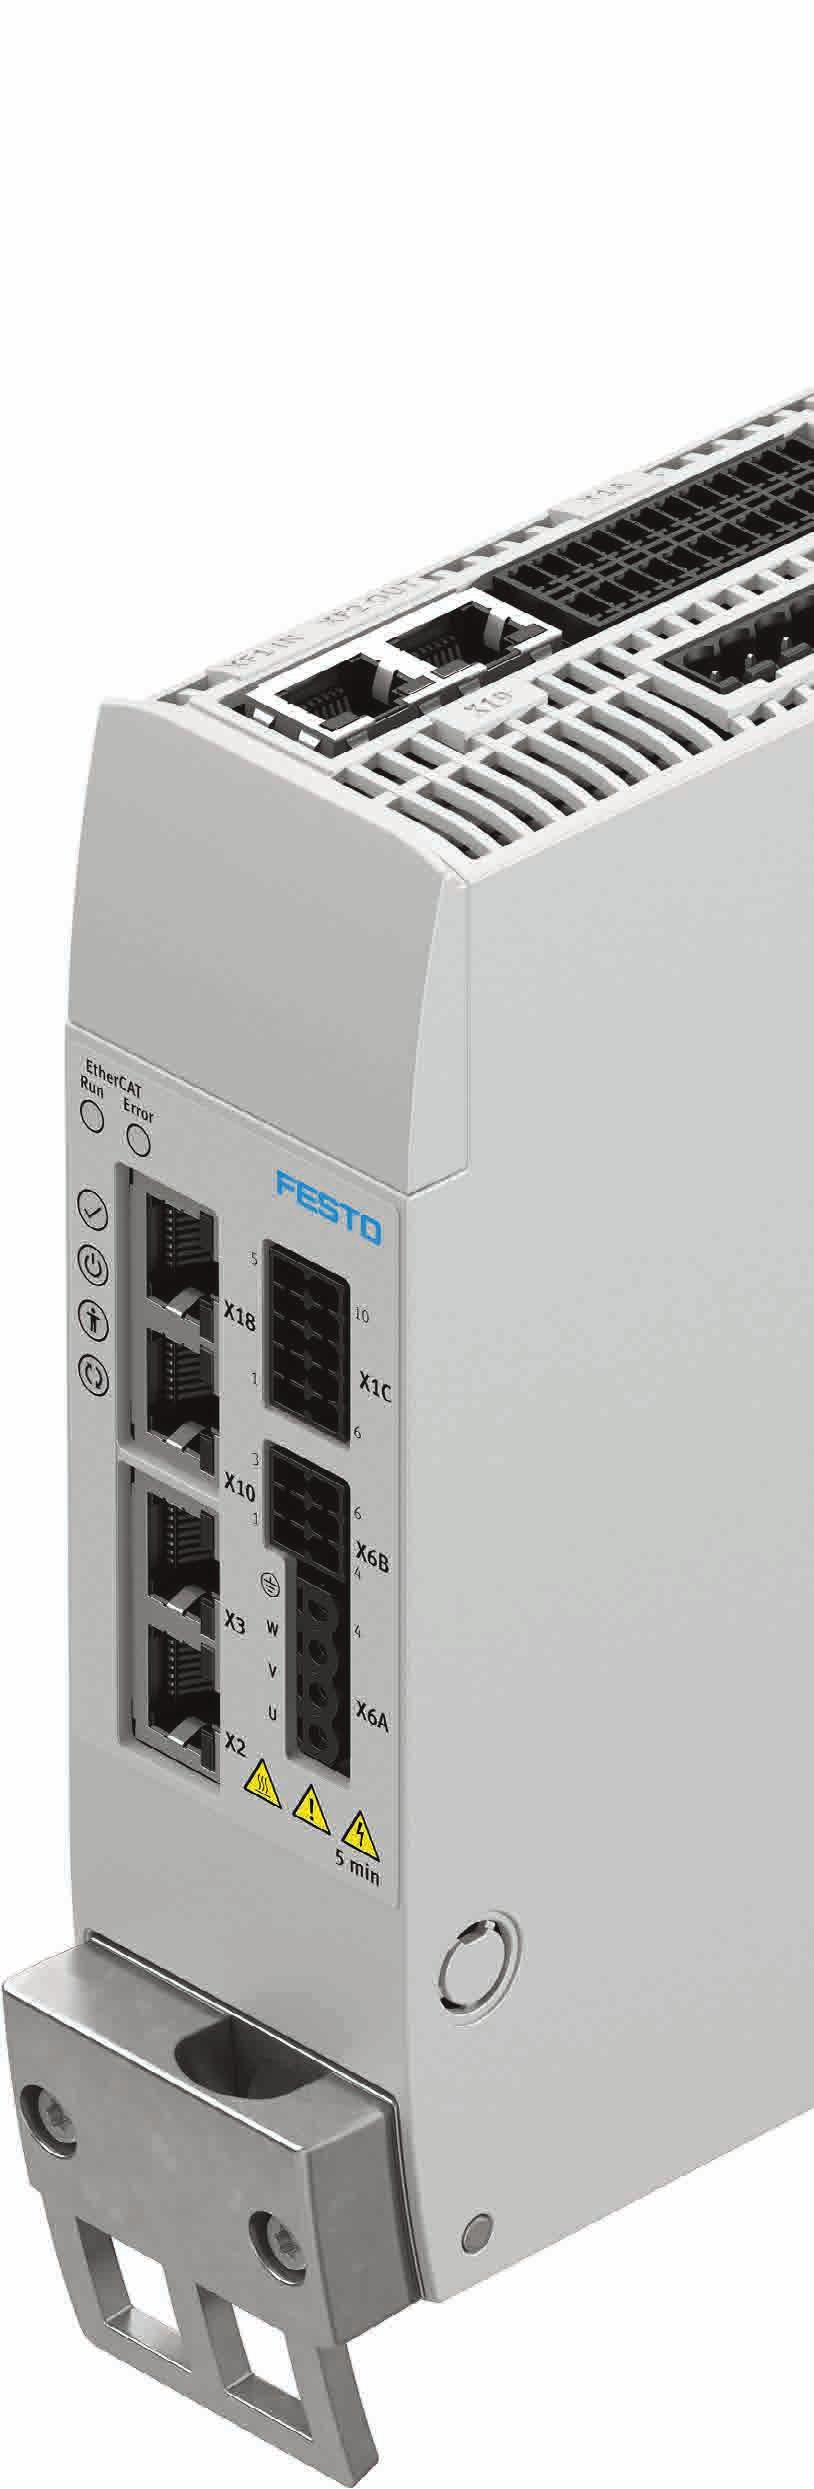 The servo drive CMMT-AS at a glance The state-of-the-art, price- and size-optimised, compact servo drive CMMT-AS is an integral part of the automation platform from Festo.